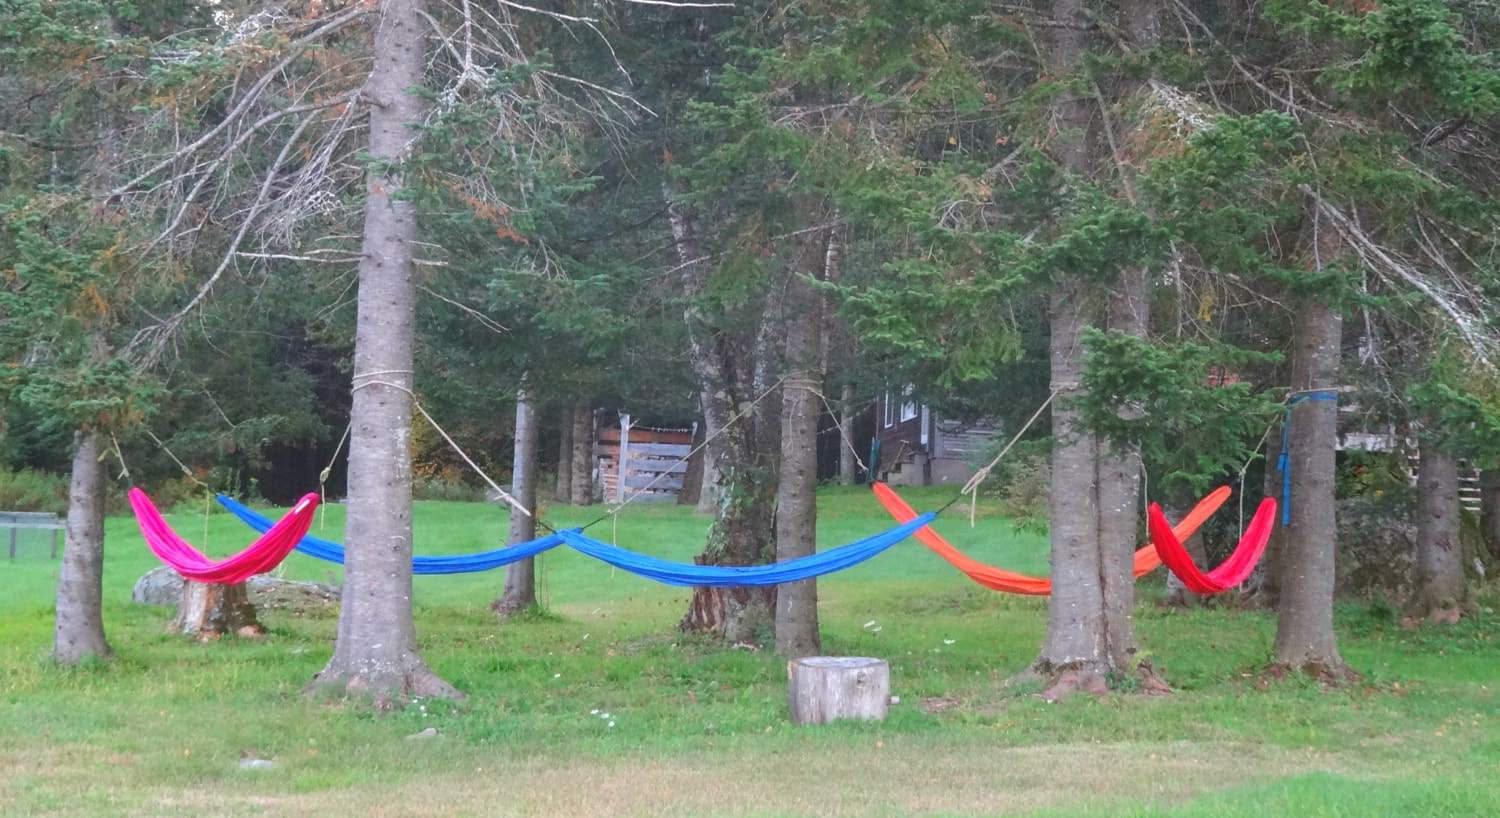 Colorful hammocks hanging from trees